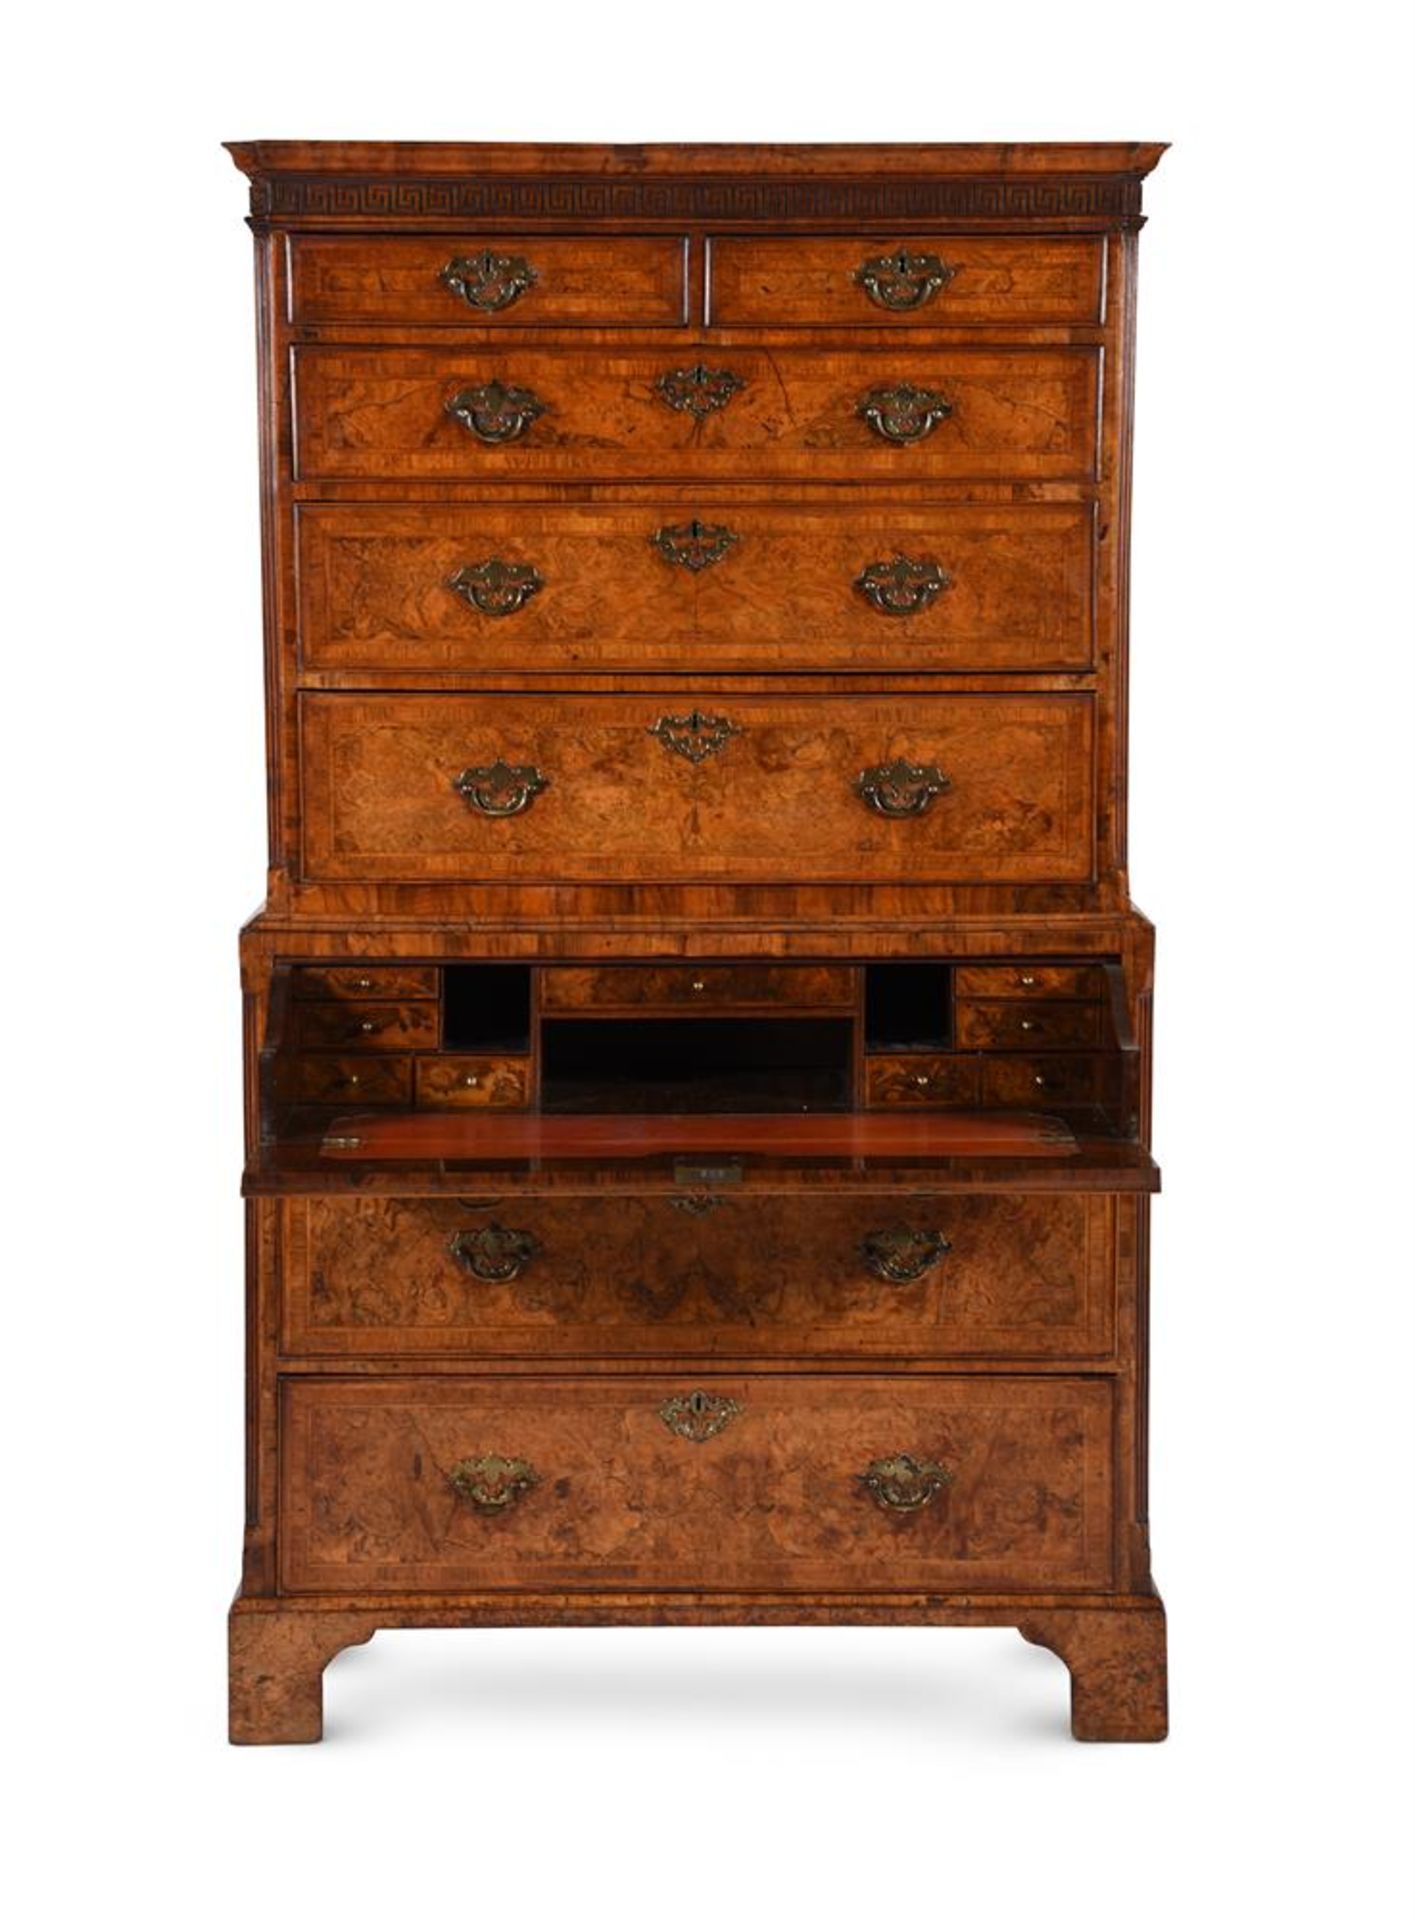 A FINE GEORGE II BURR WALNUT SECRETAIRE CHEST ON CHESTIN THE MANNER OF GILES GRENDEY - Image 2 of 7